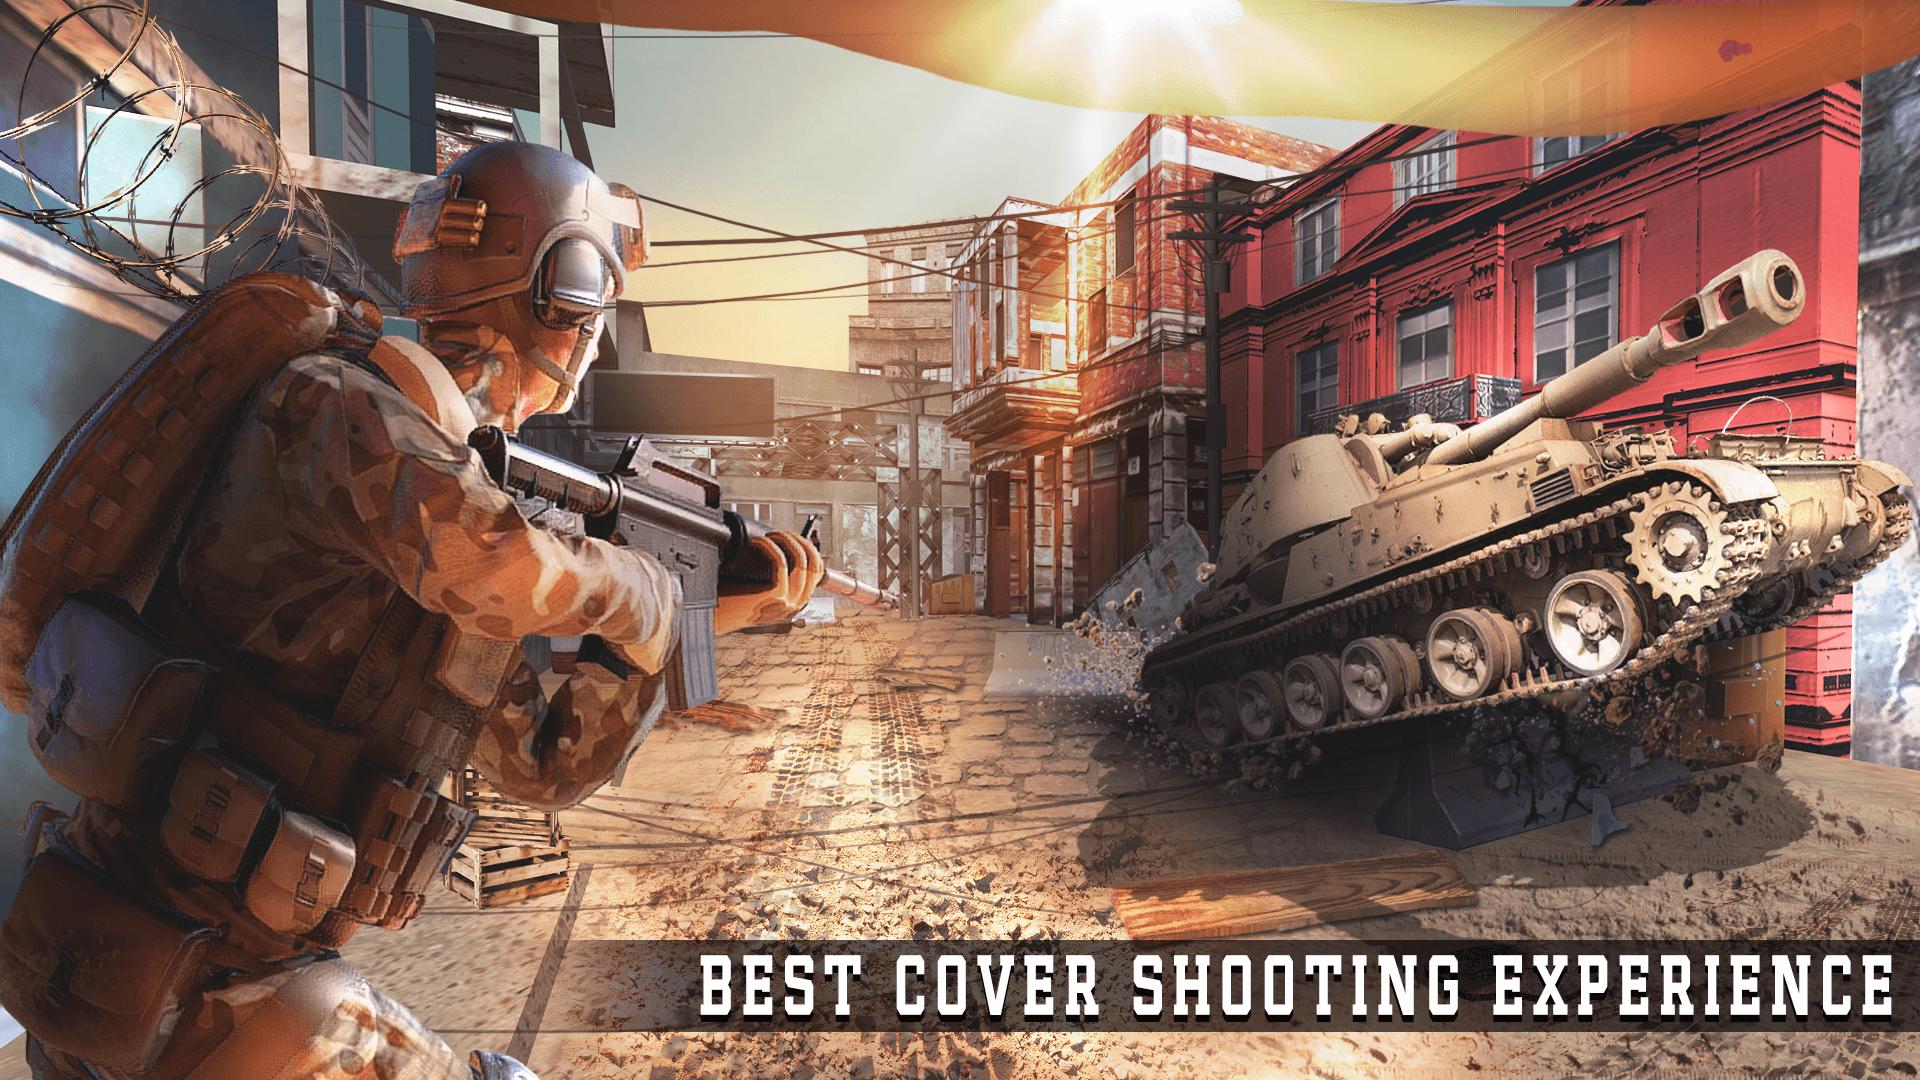 Cover Fire IGI Shooting Games FPS for Android